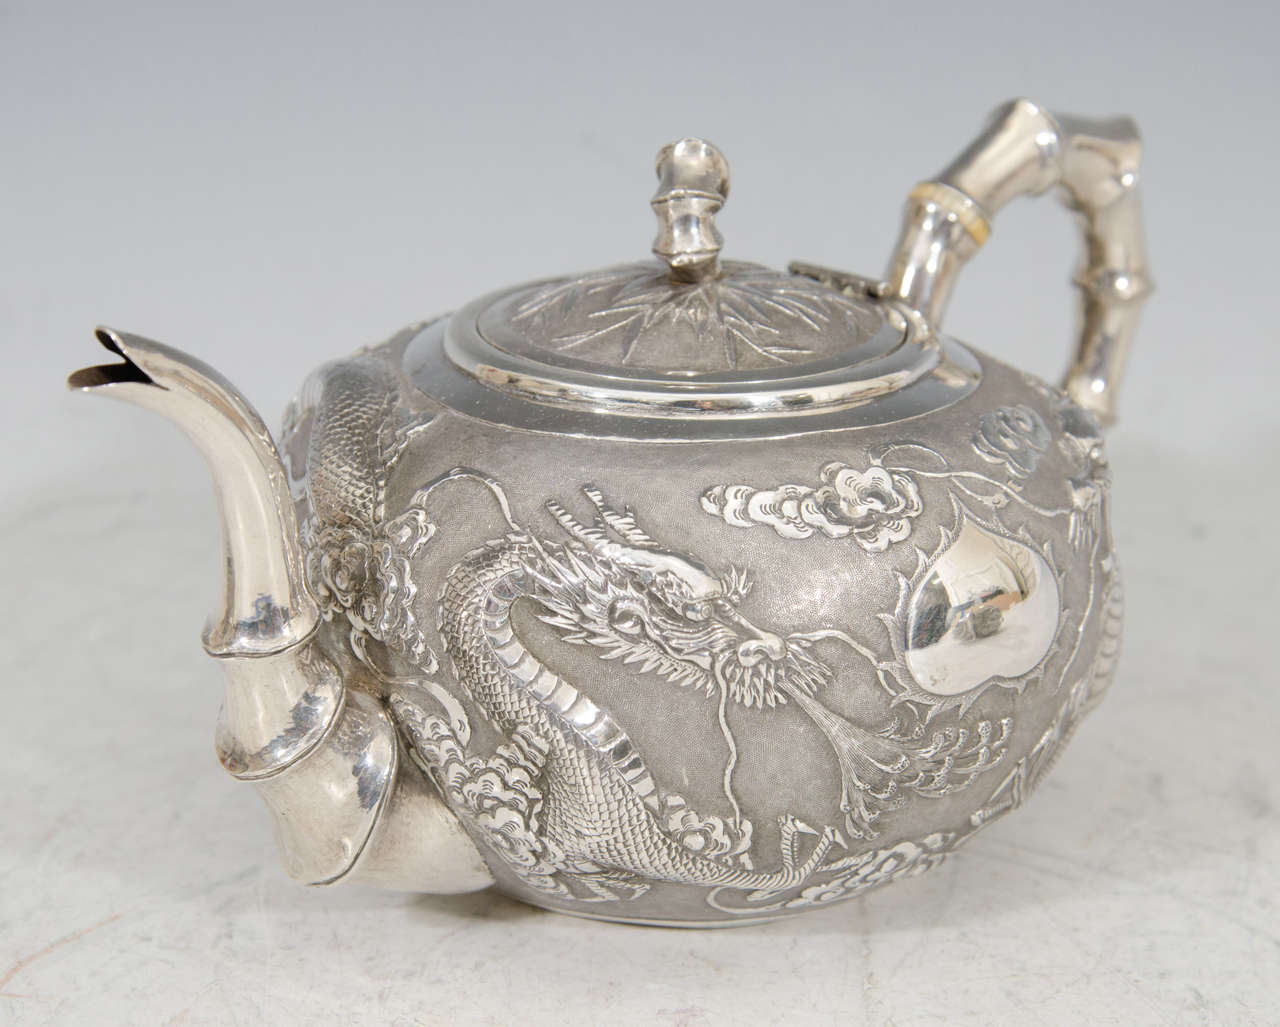 A finely worked Chinese export tea set in silver decorated with two dragons chasing a ball. Each piece has a faux bamboo handle and spout. Clearly marked Wang Hing.

Good condition with age appropriate patina.

Measures: Creamer 5.5